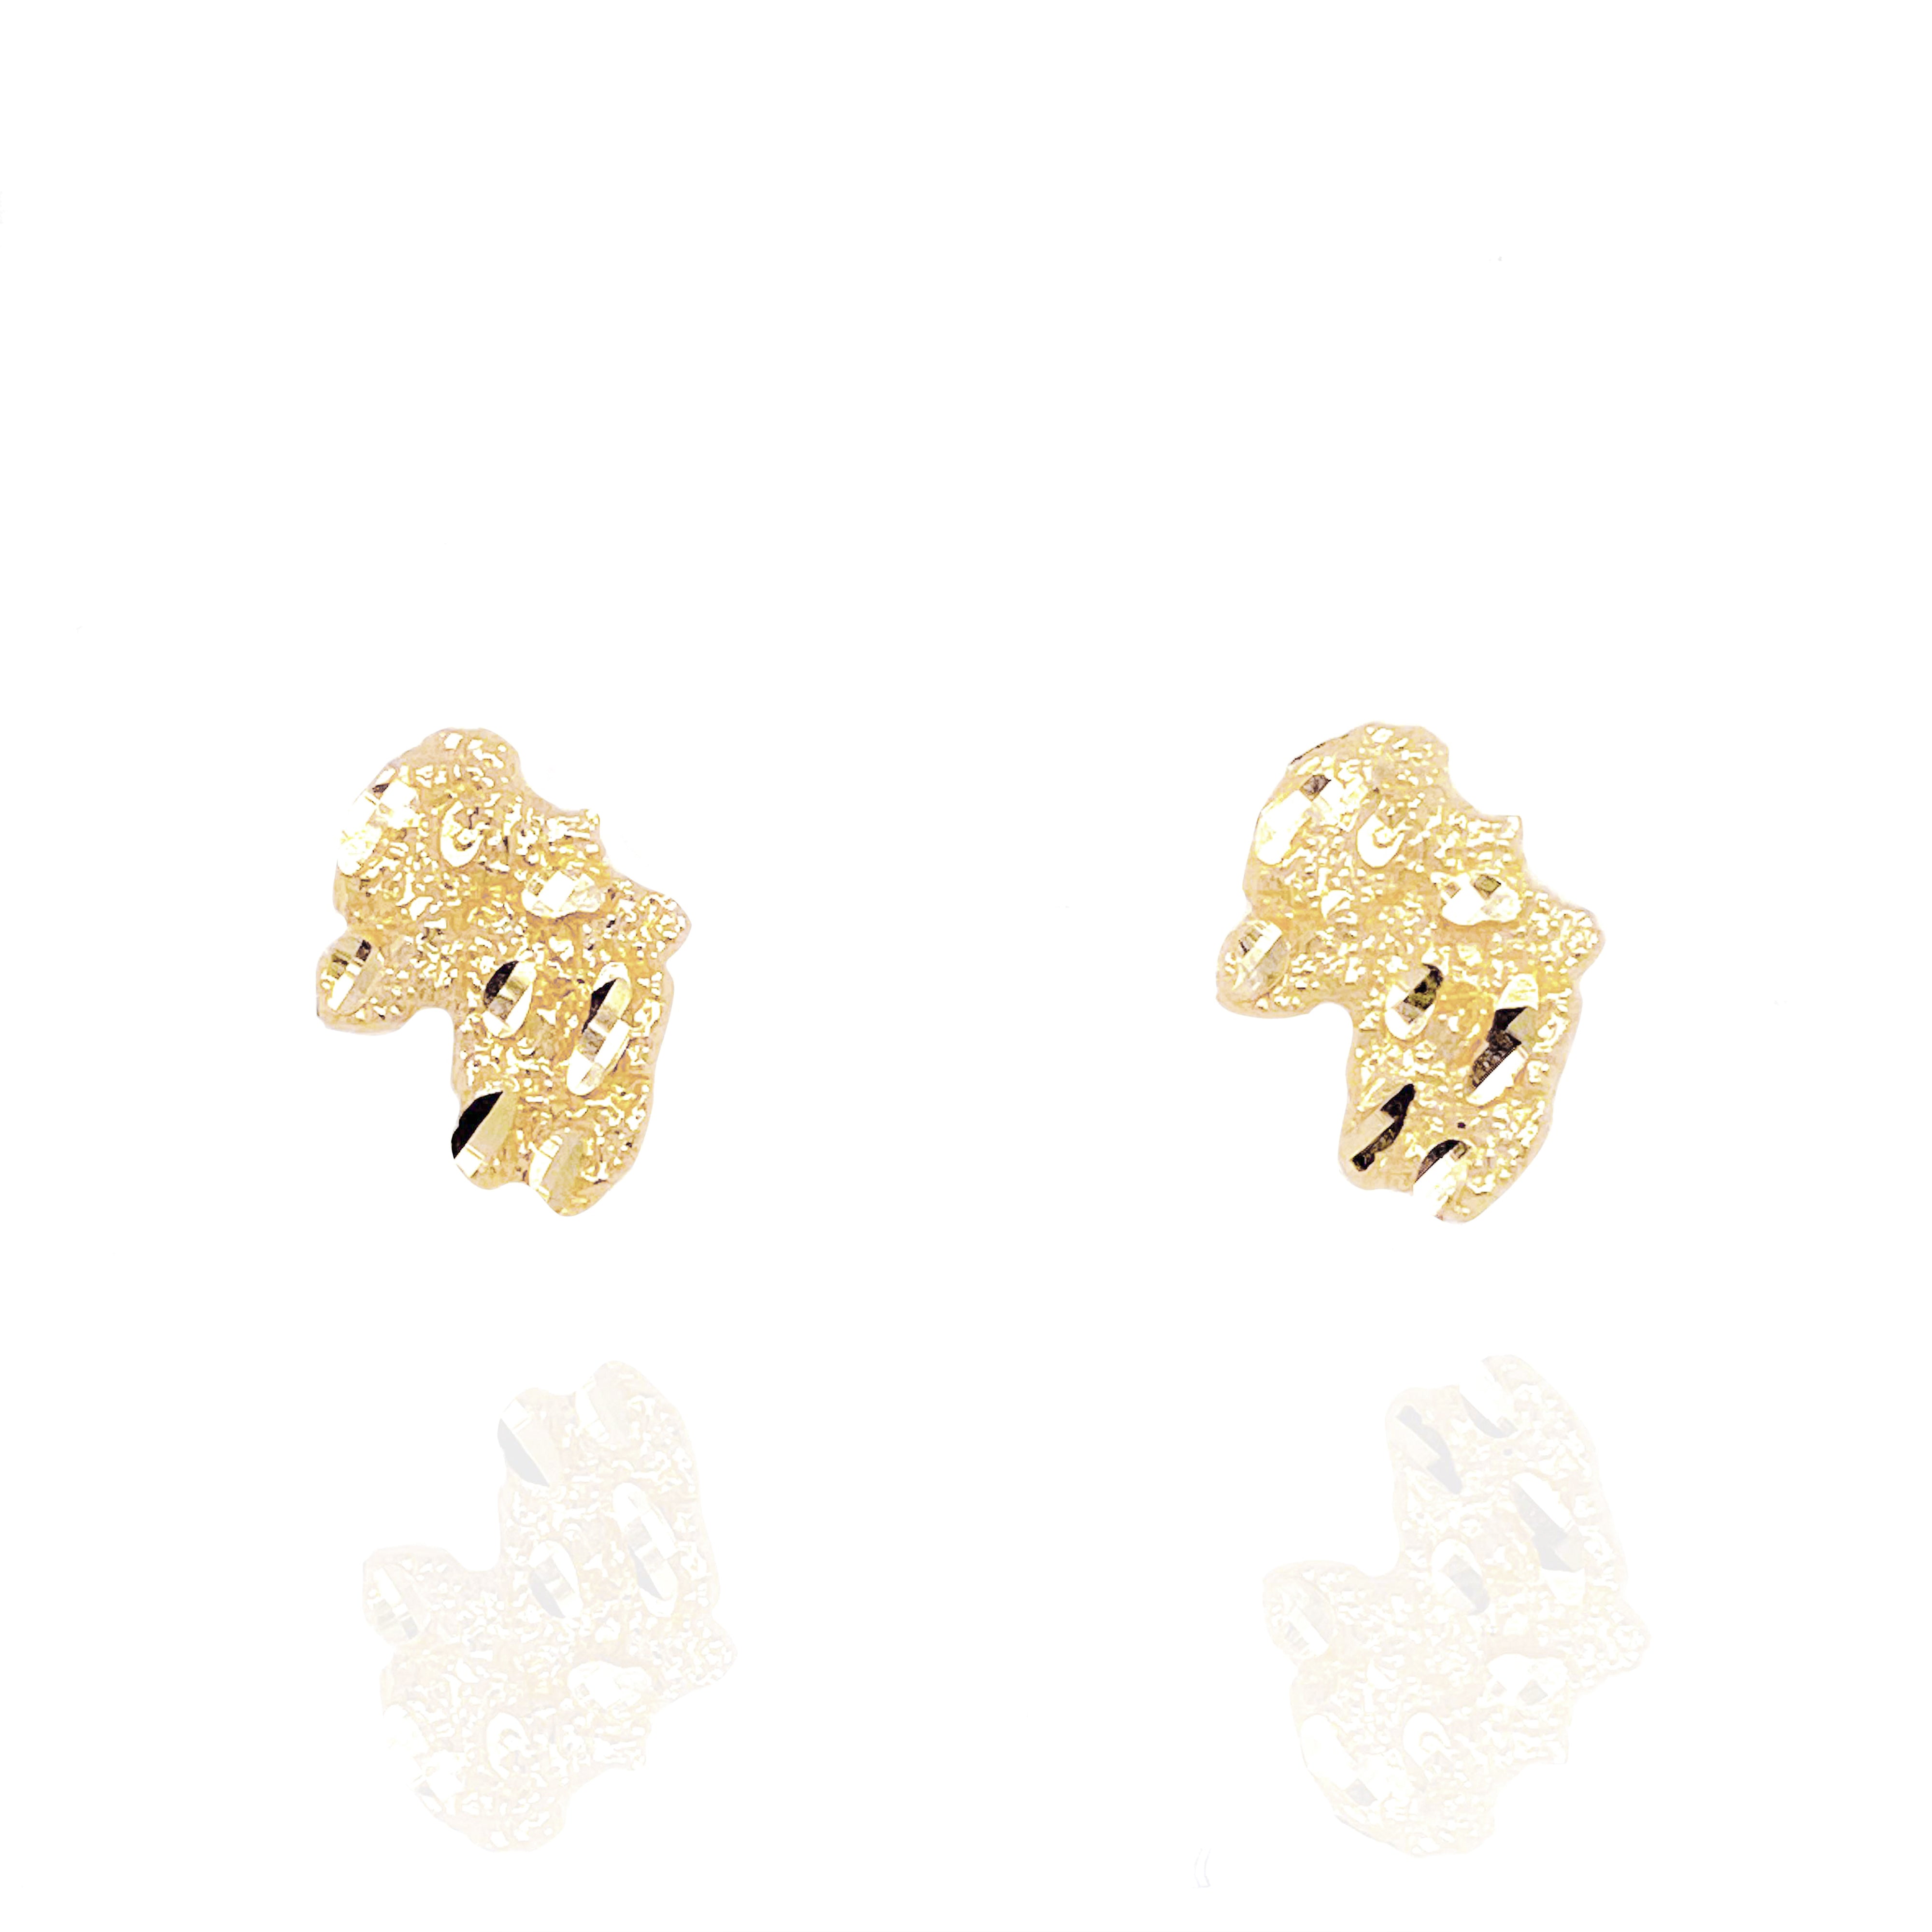 Solid Gold Nugget Style Earrings